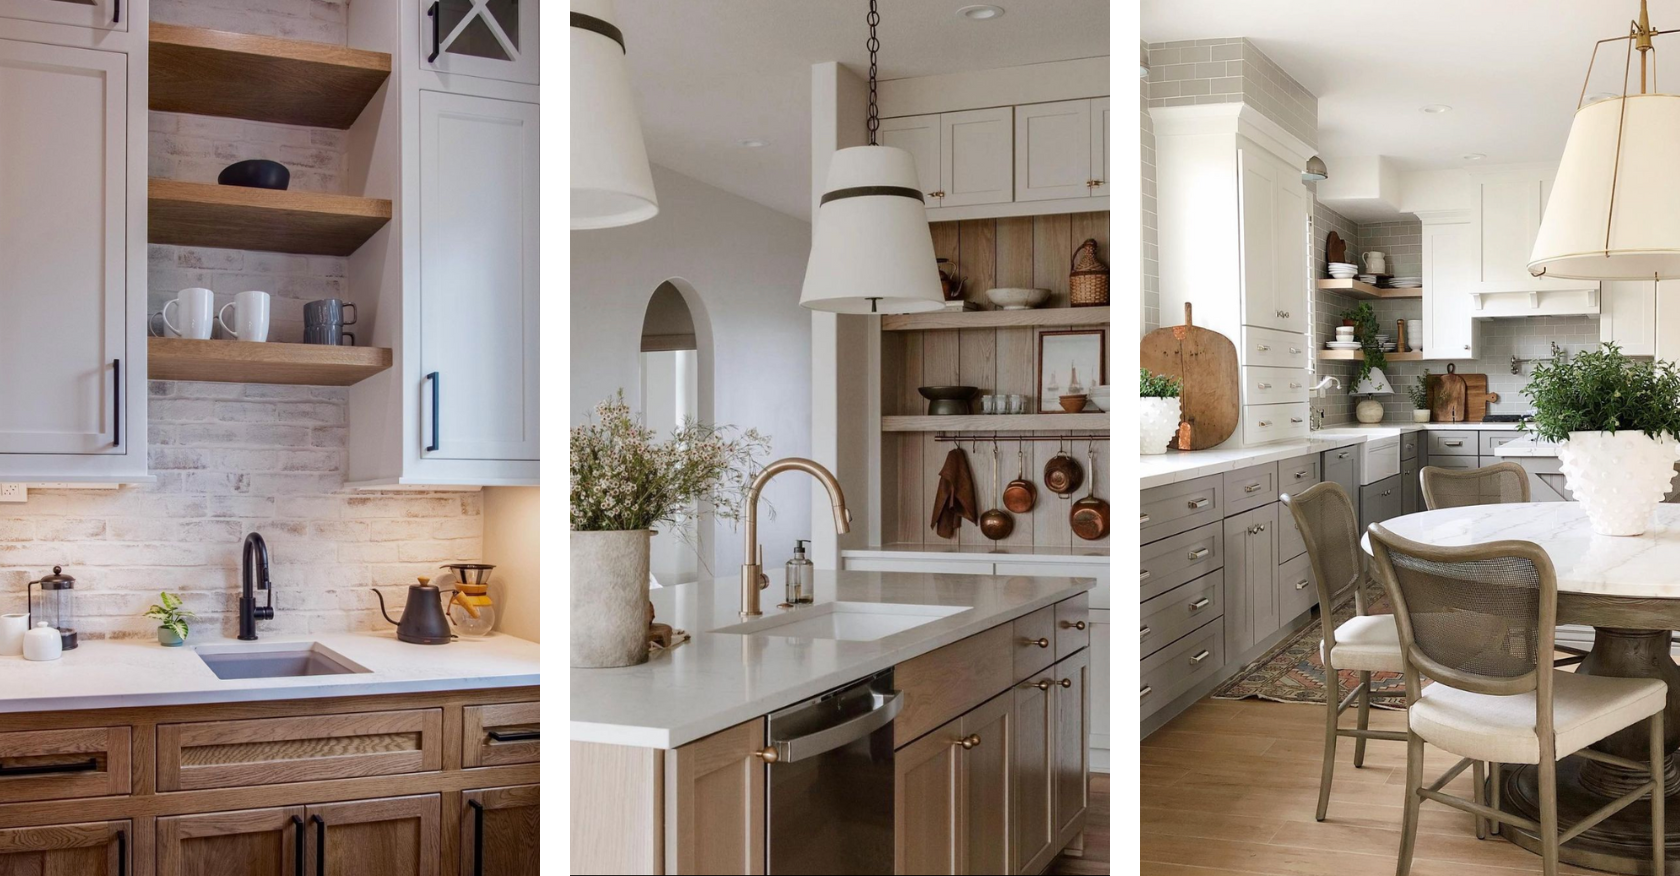 5 Kitchen Decor Ideas To Give You the Cozy Cook Space of Your Dreams